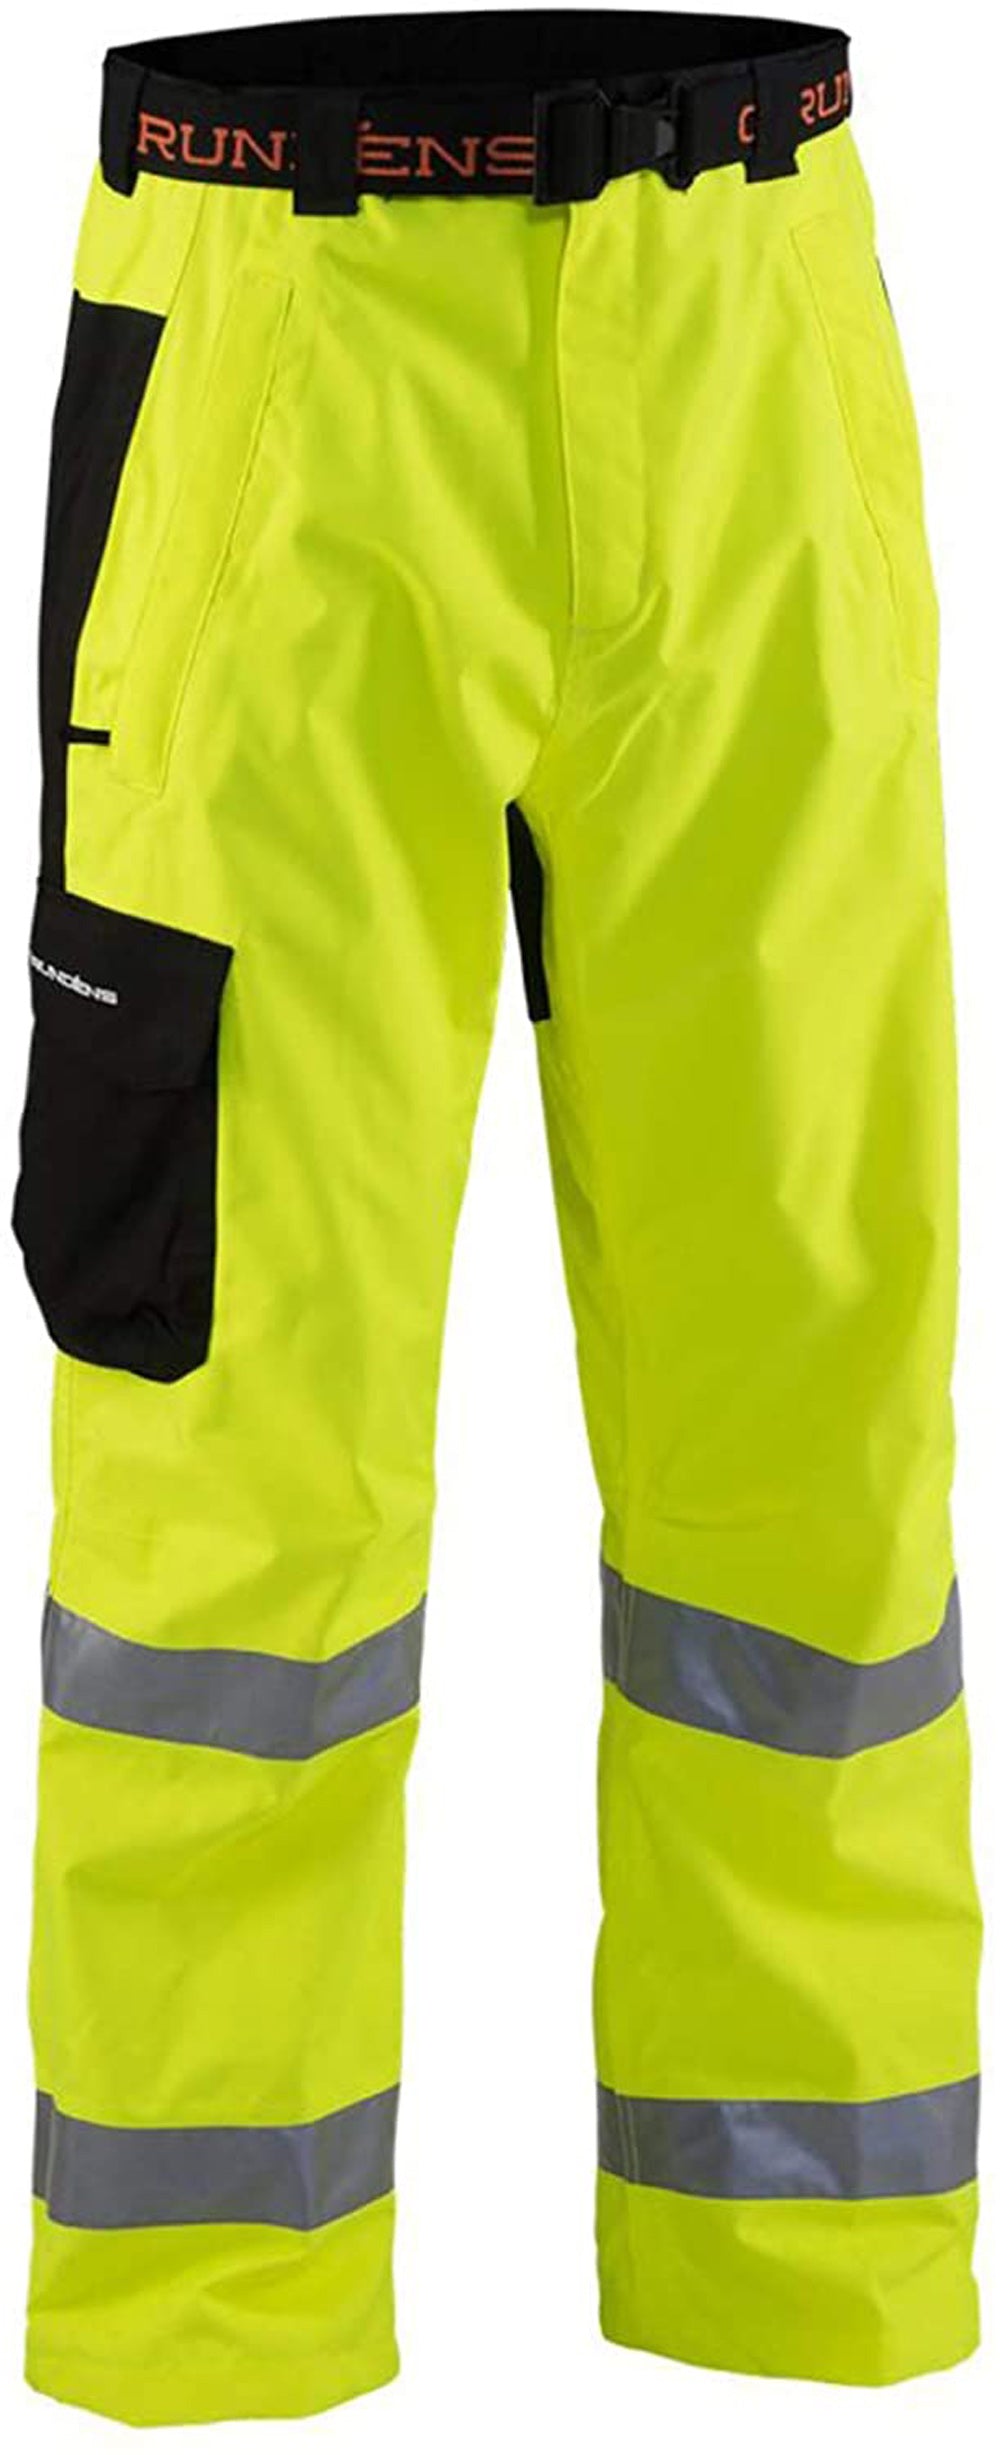 Weather Watch Pant in Reflective Yellow color from the front view